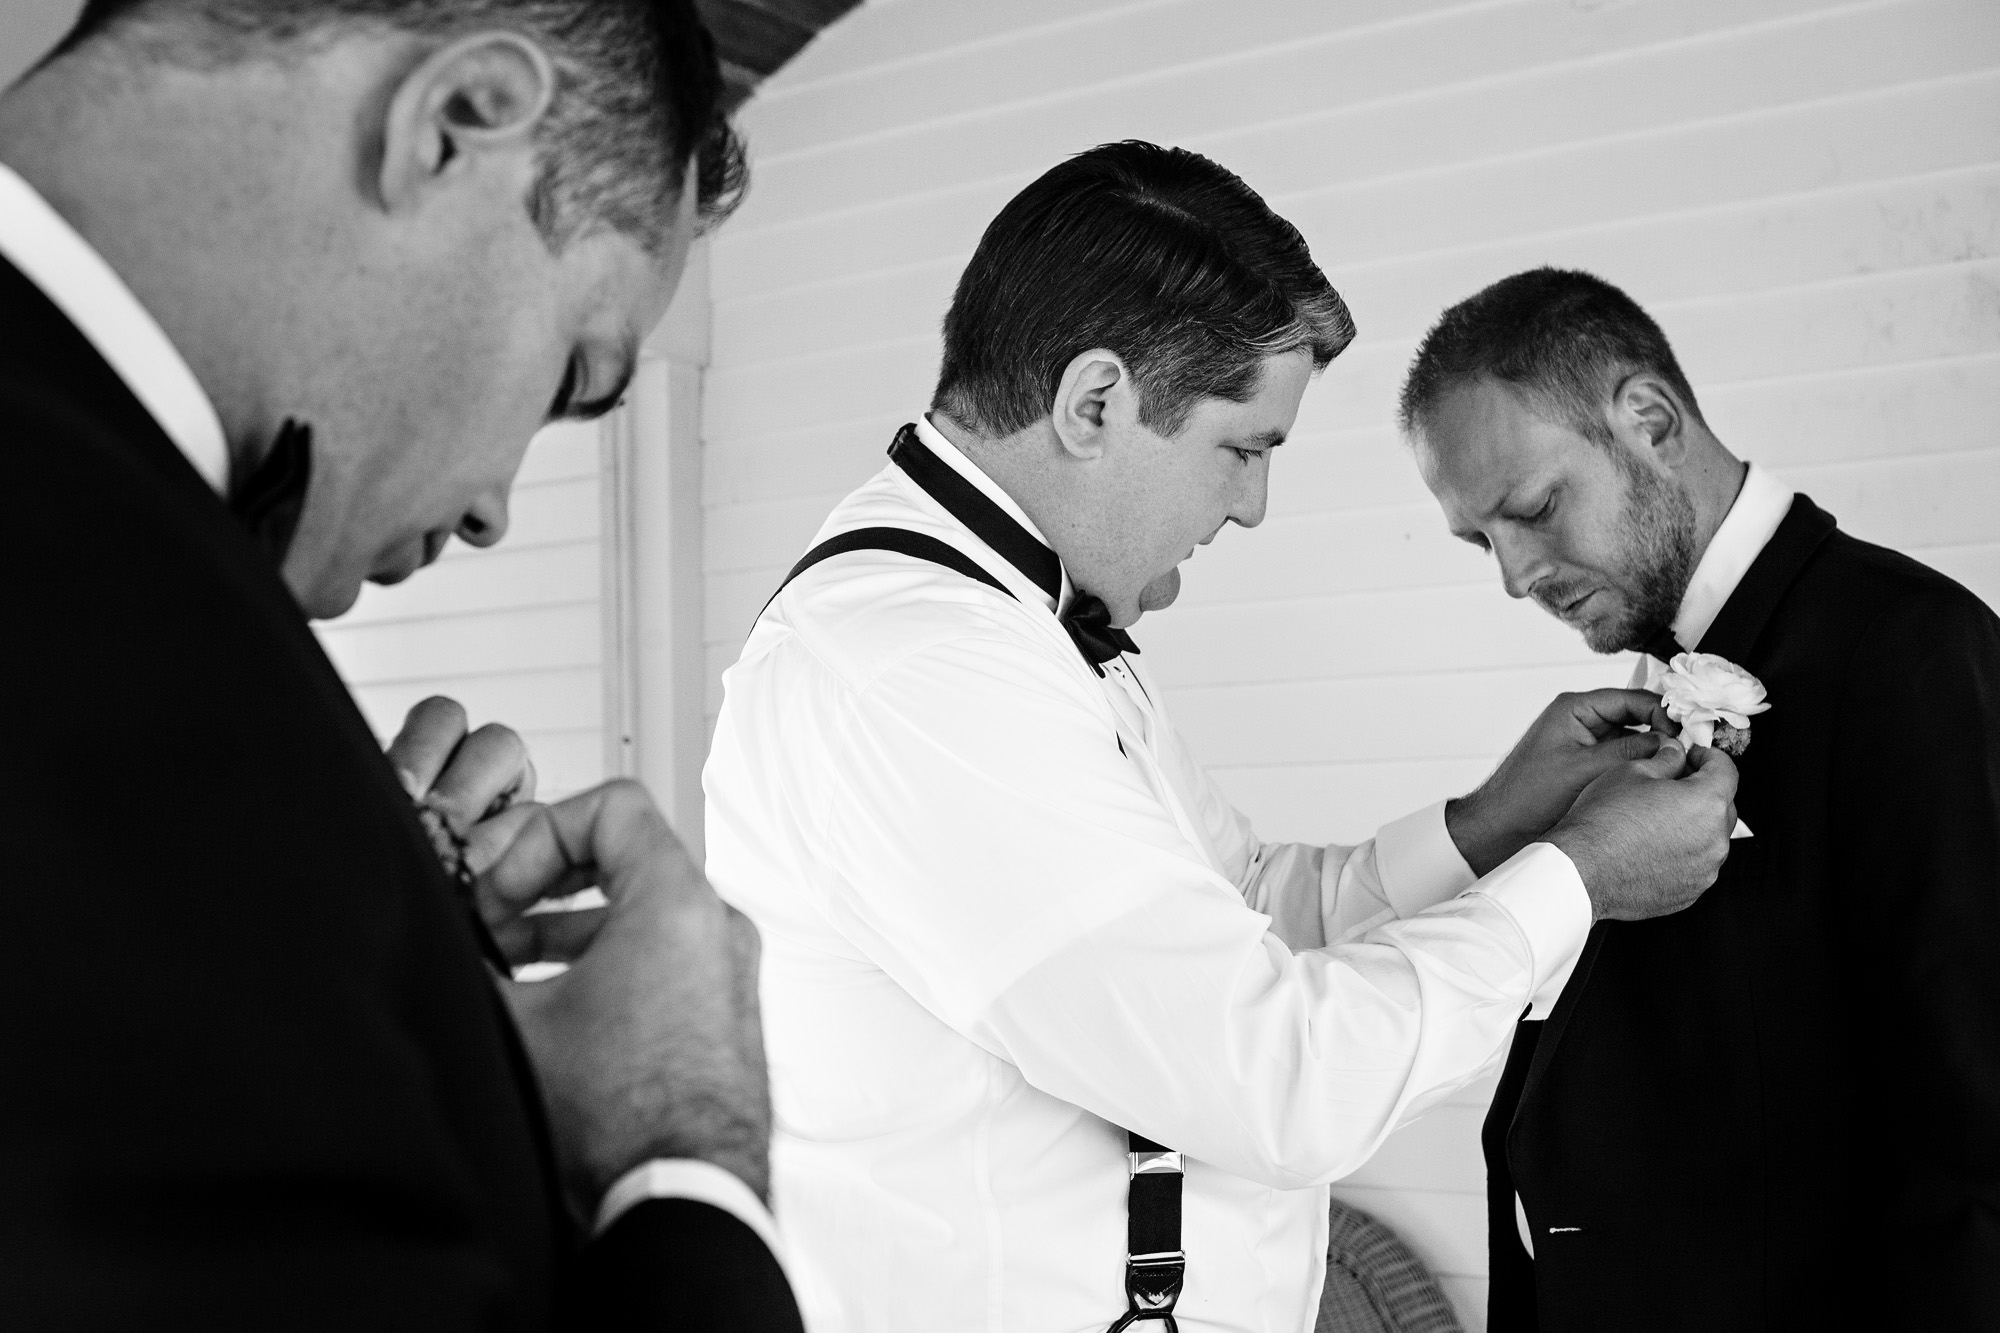 The groom prepares for his wedding at Newagen Seaside Inn in Southport, Maine